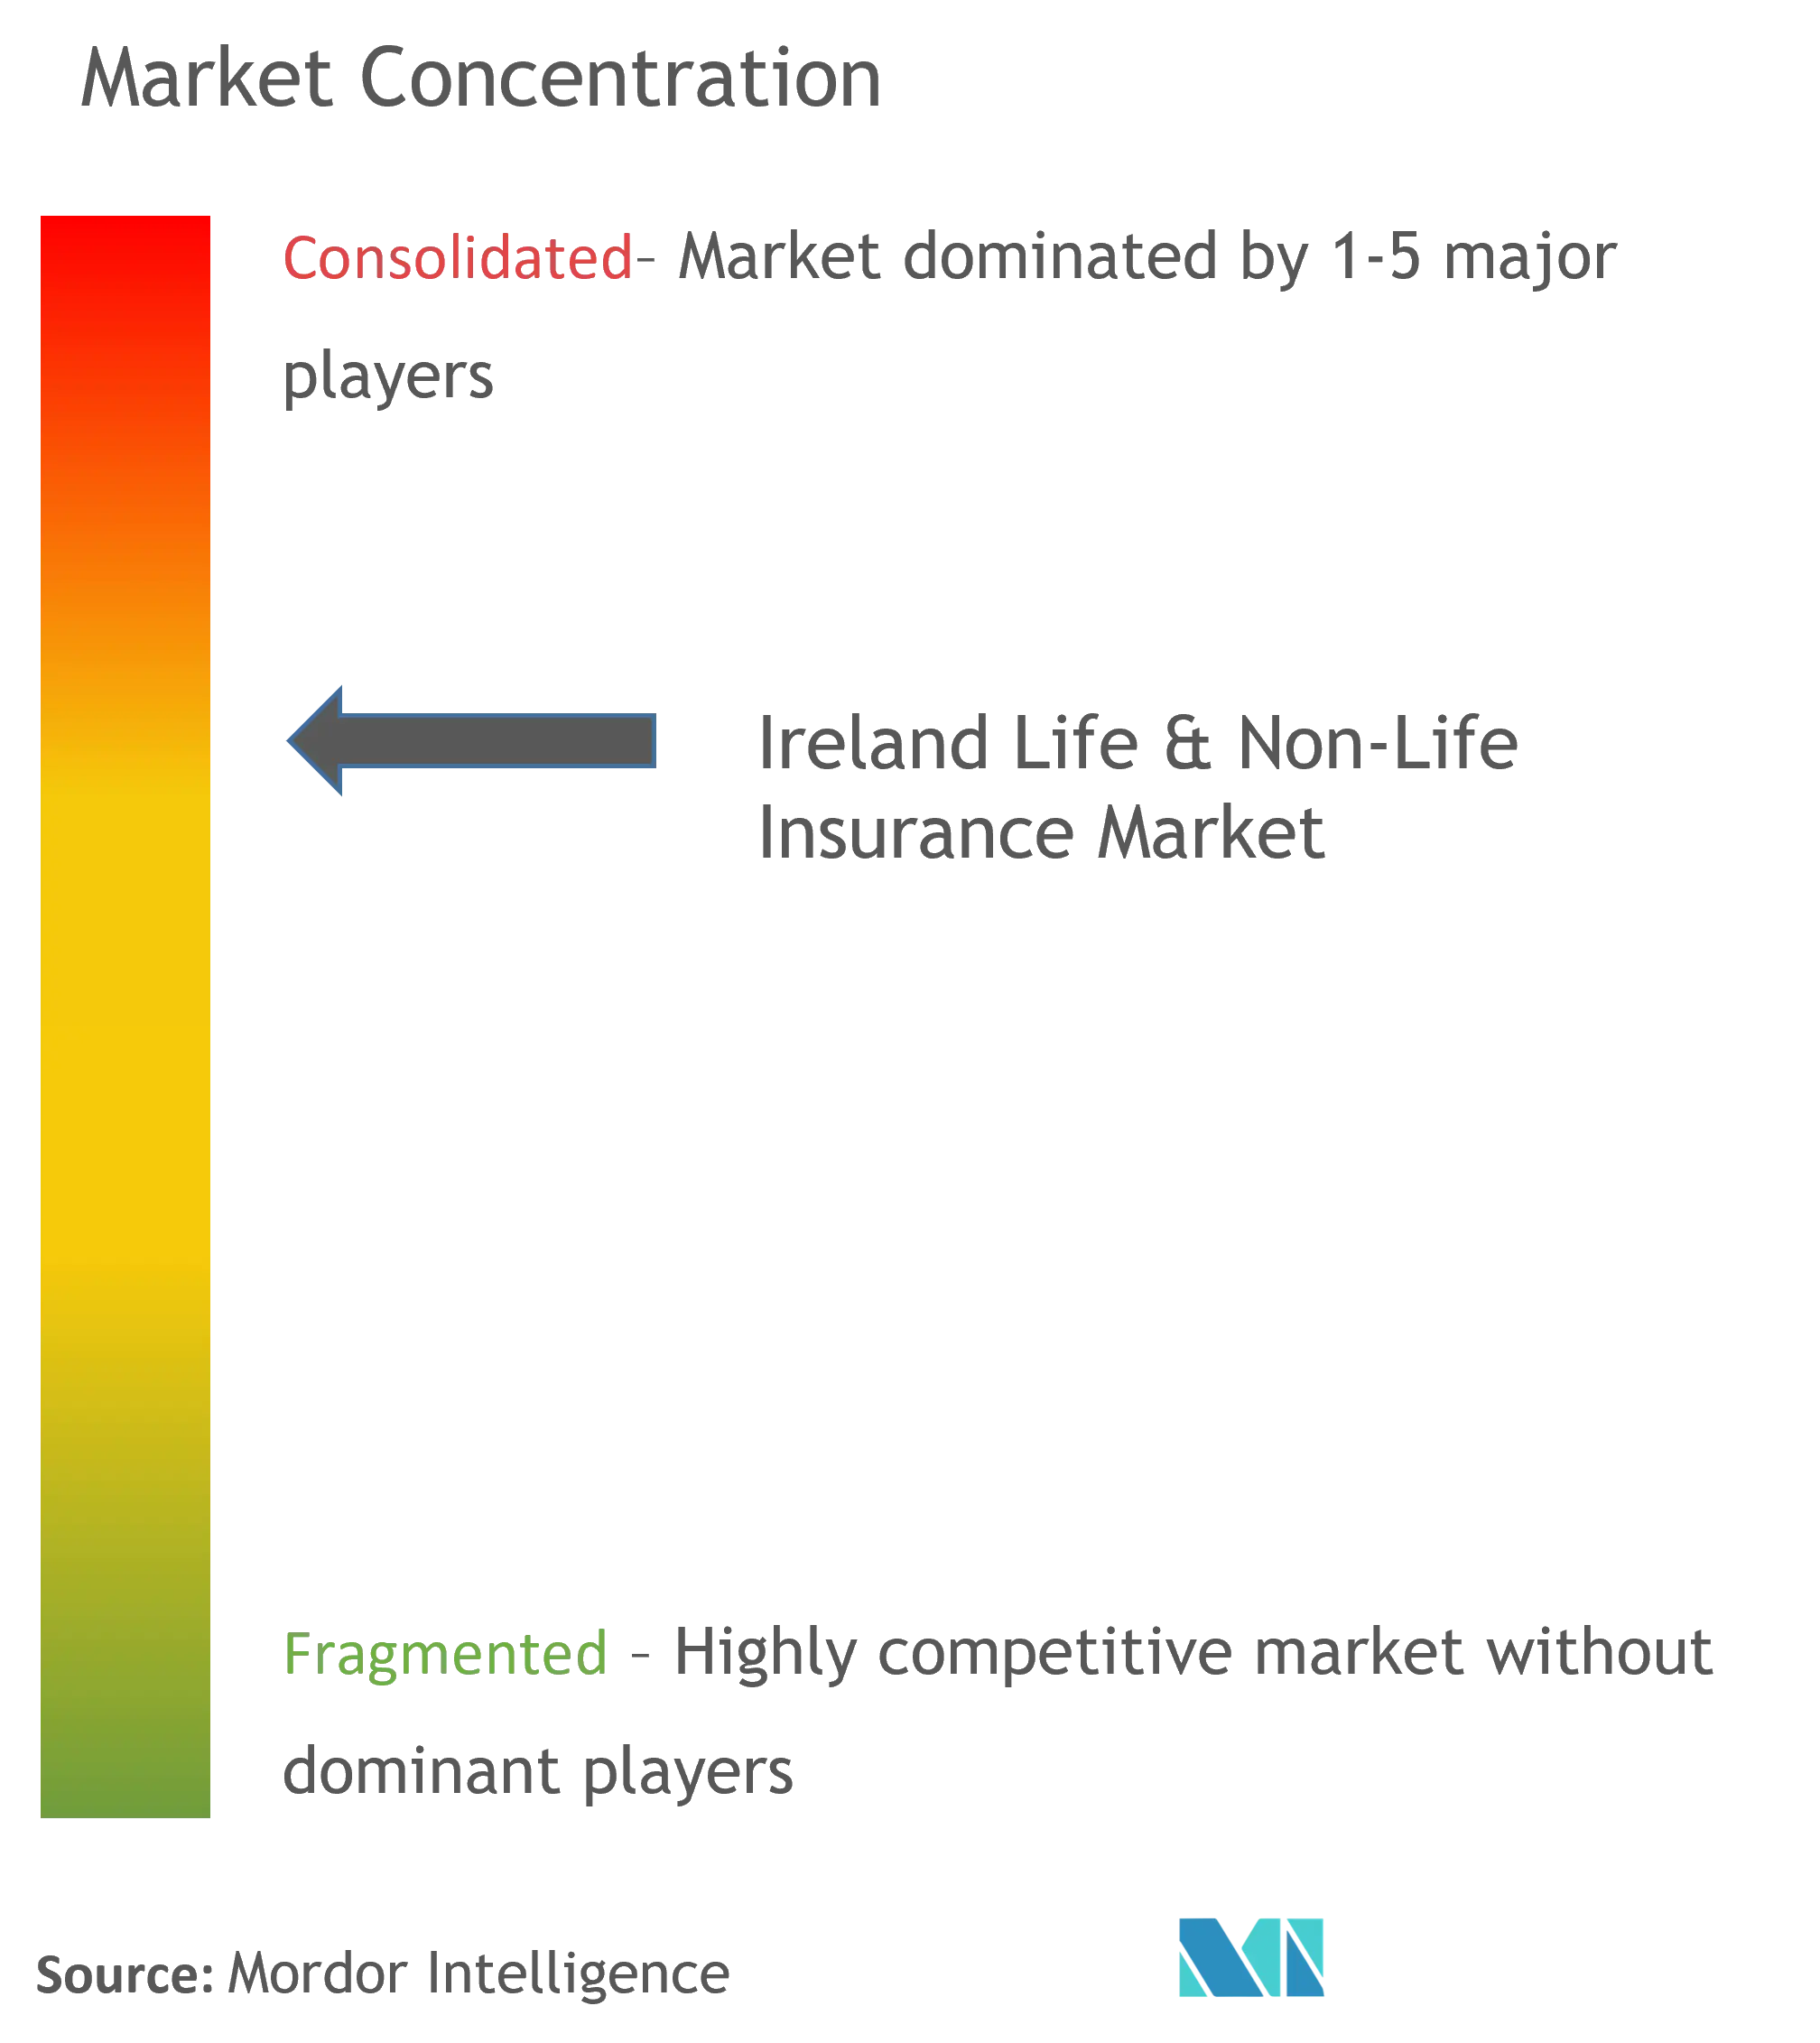 Market Concentration -Ireland Life & Non-Life Insurance Market.png